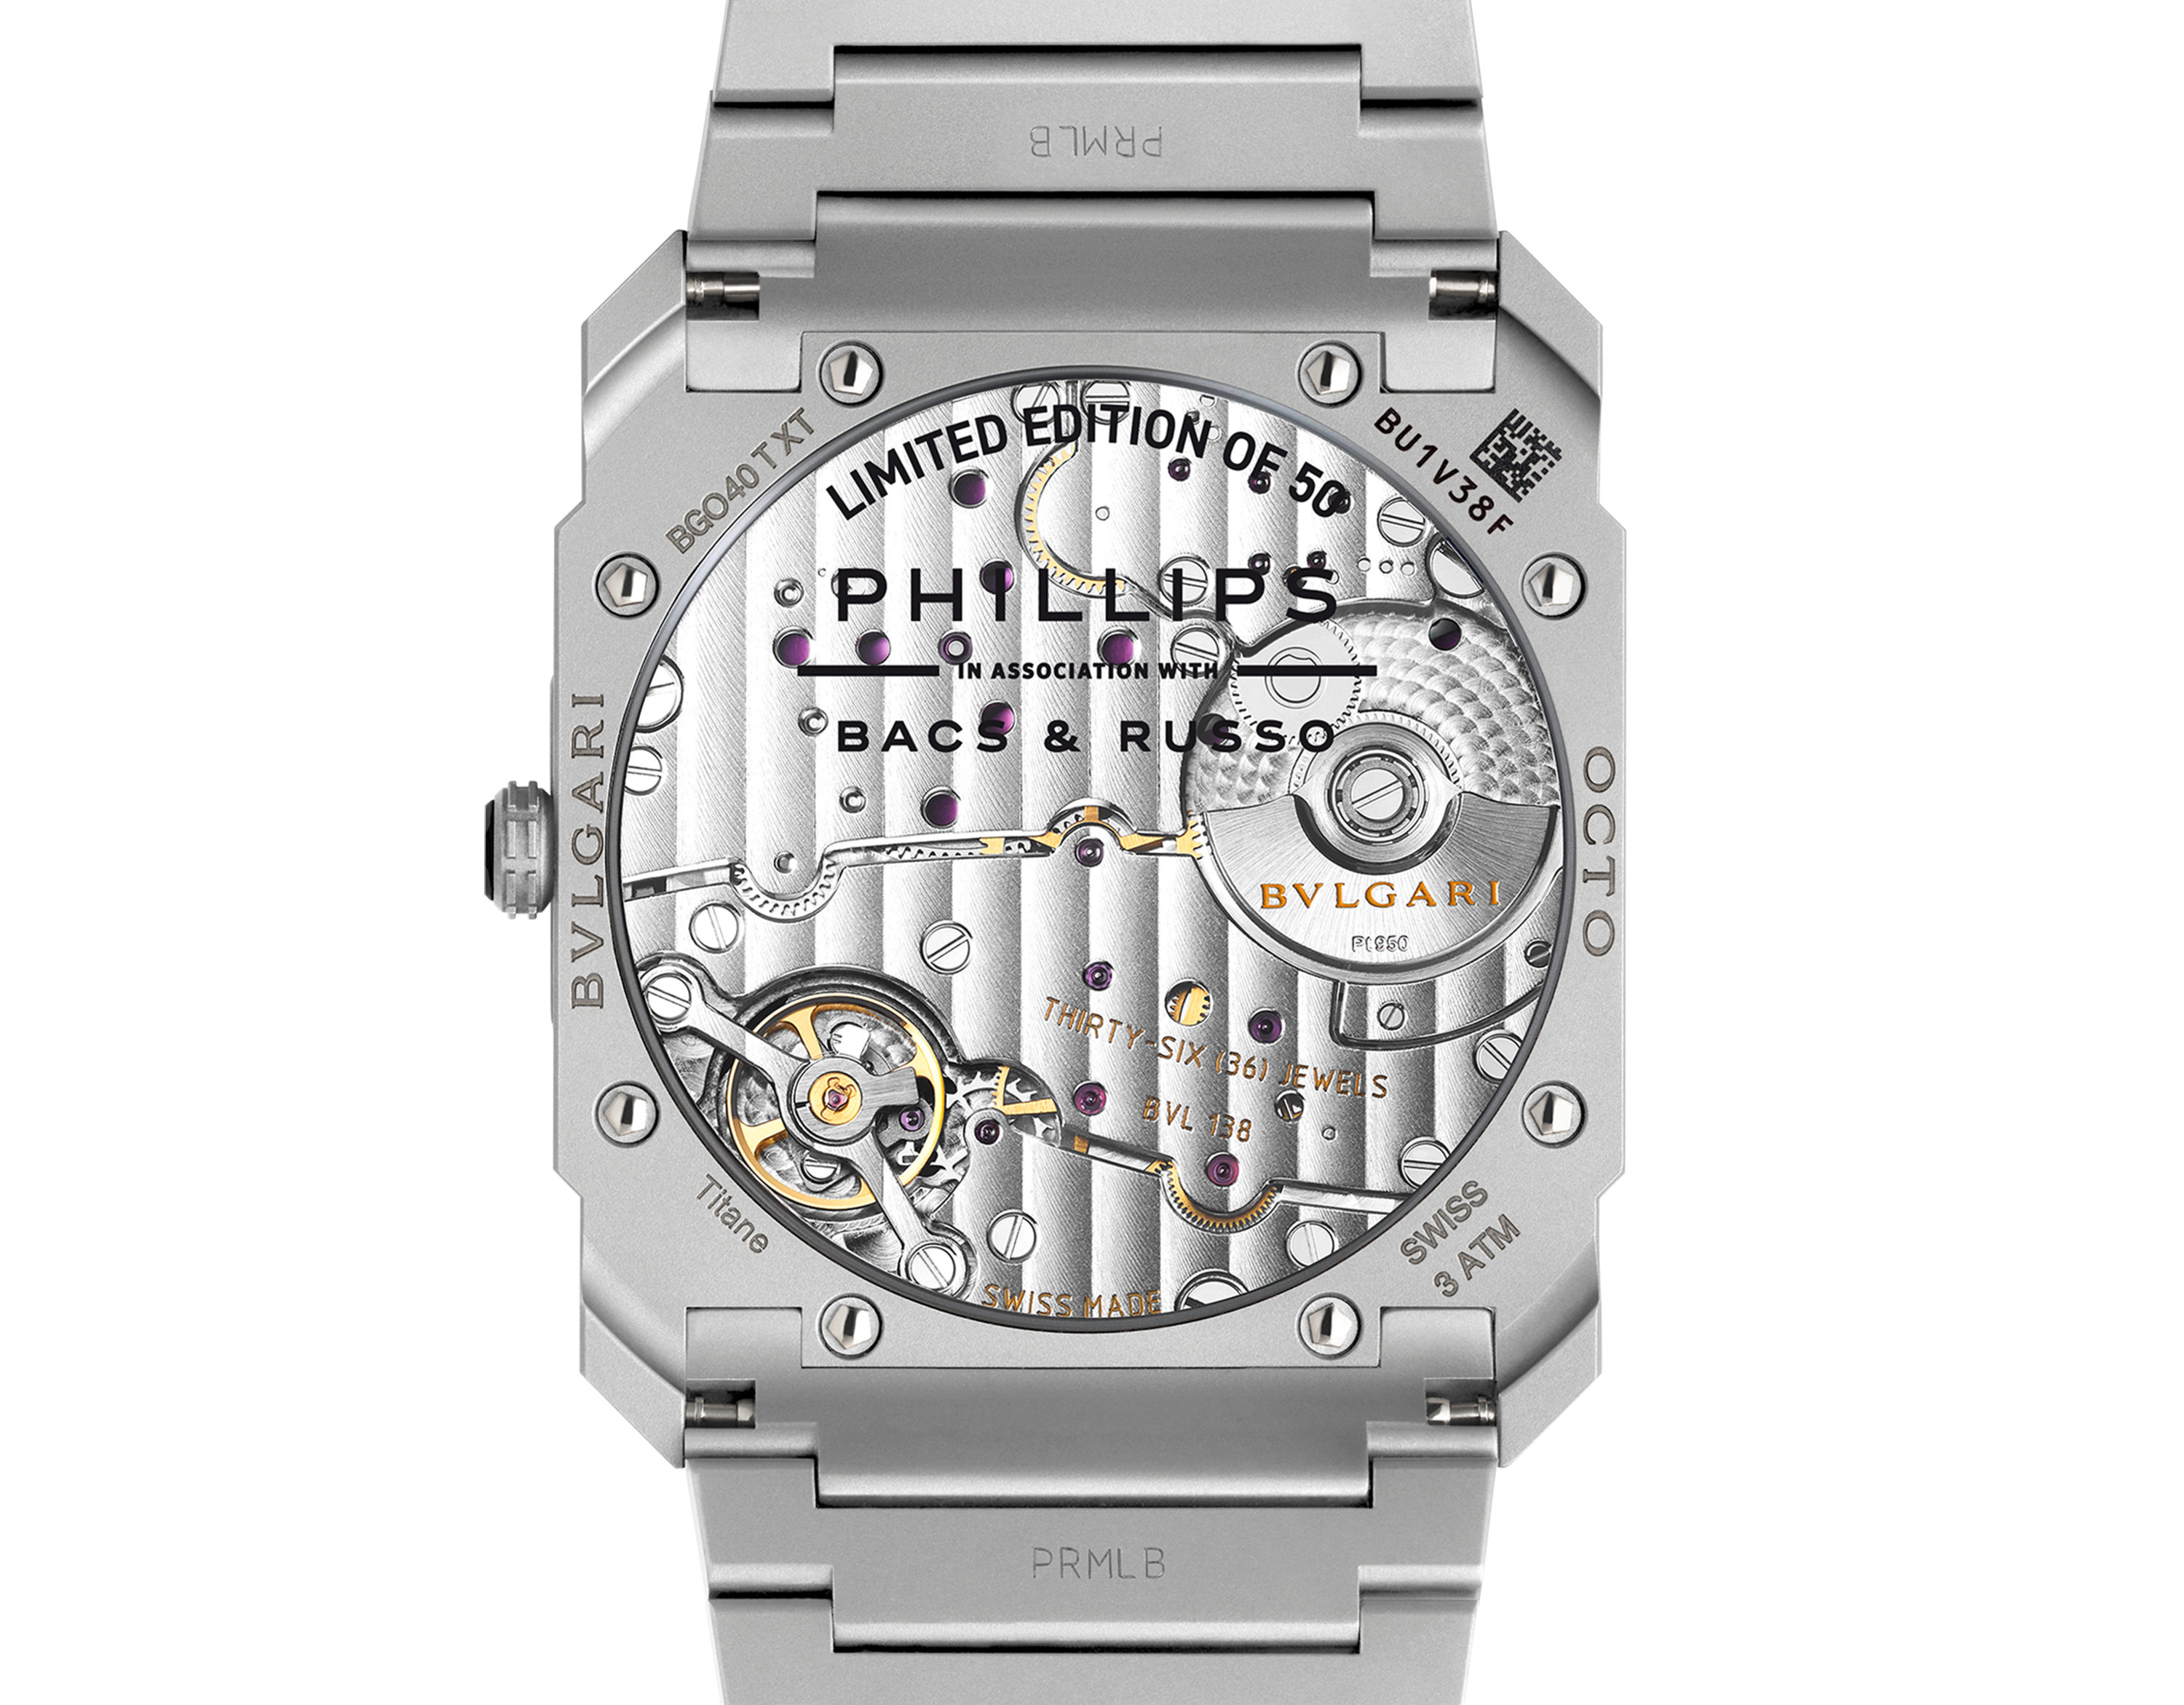 Bulgari and Phillips Team Up for Ultra-Thin Limited Octo Finissimo With a Sector Dial